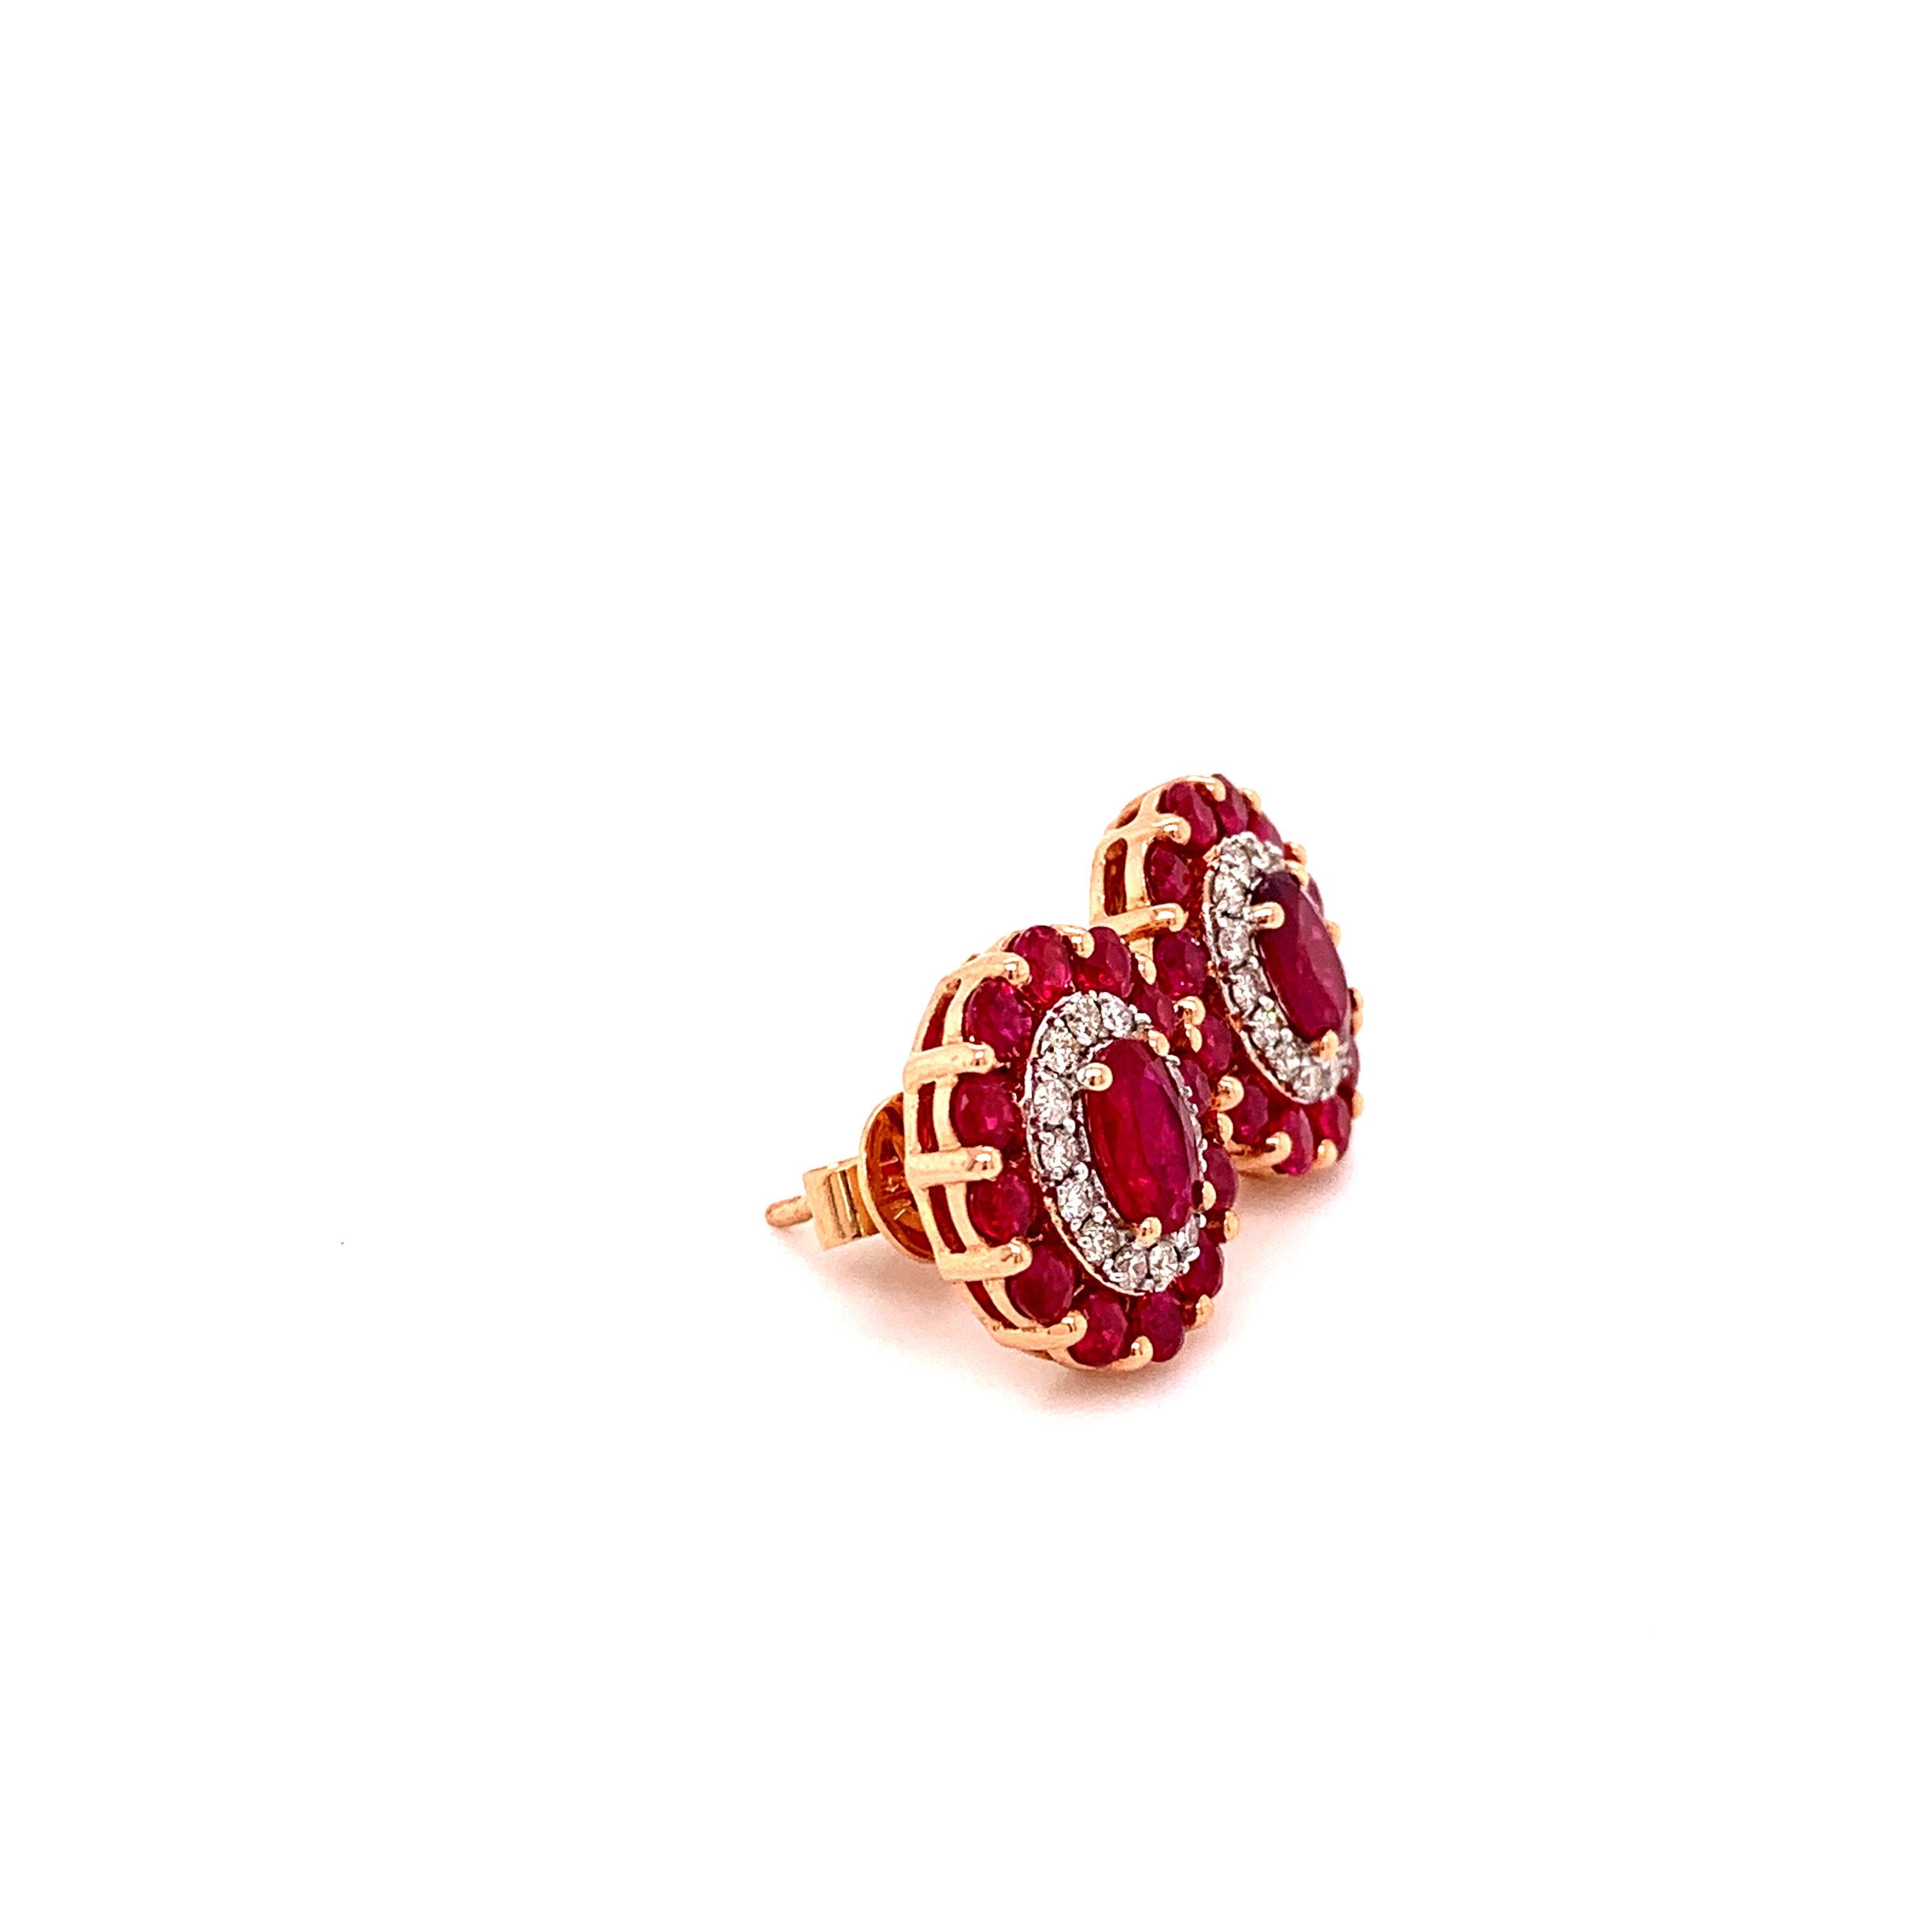 Stunning ruby diamond halo stud earrings. Lively pomegranate red, high luster, oval faceted, 2.71 carats natural rubies set high profile open basket with bead prongs, accented with round brilliant diamond row. Handcrafted elegant halo design pair of